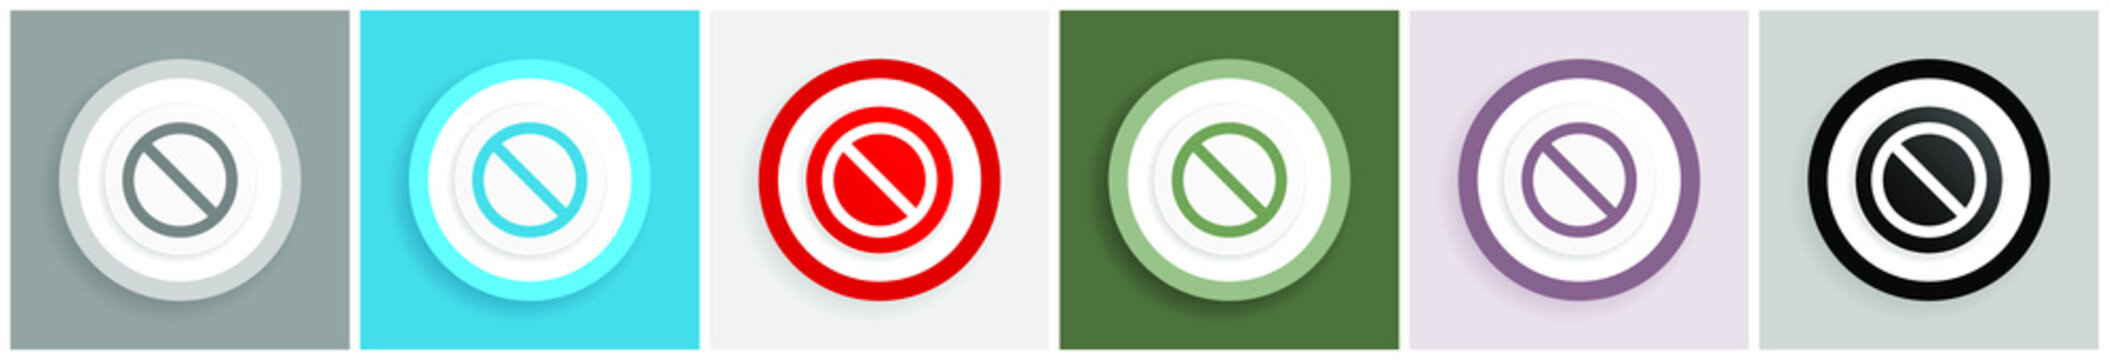 Access denied icon set, colorful flat design vector illustrations in 6 options for web design and mobile applications